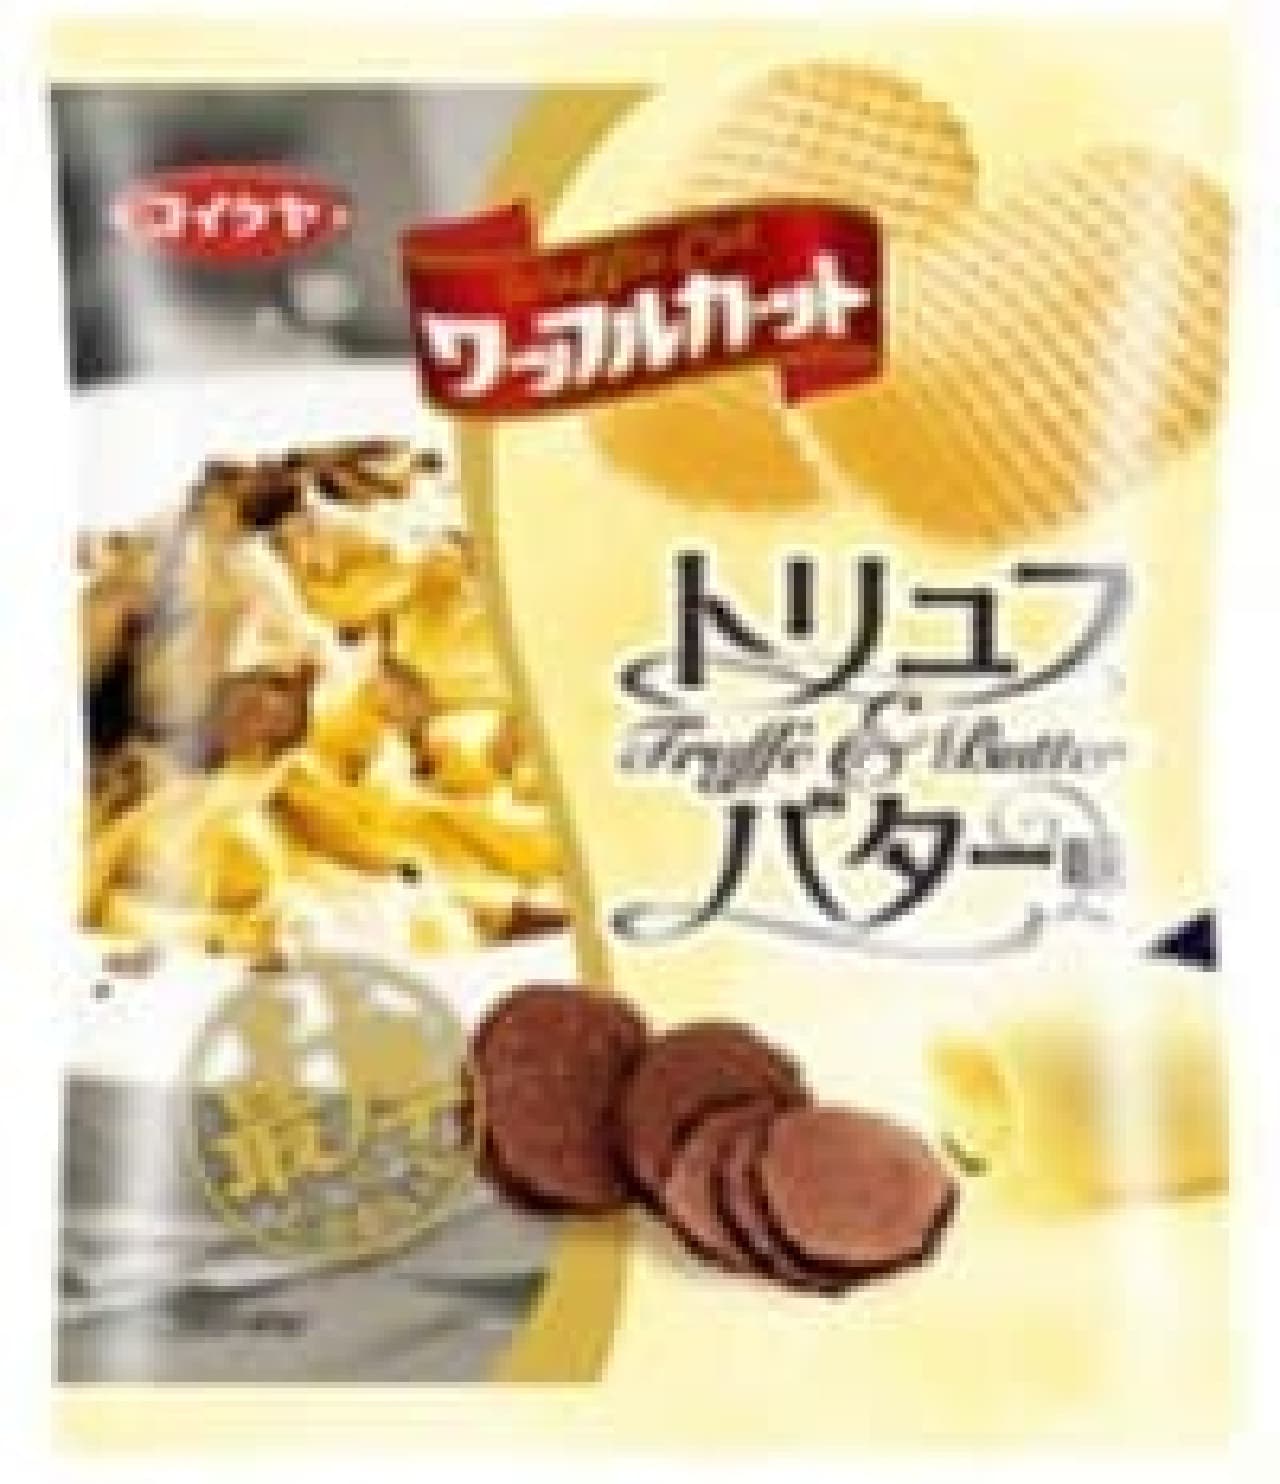 Truffle flavor is now available in the "thickest ever" potato chips!